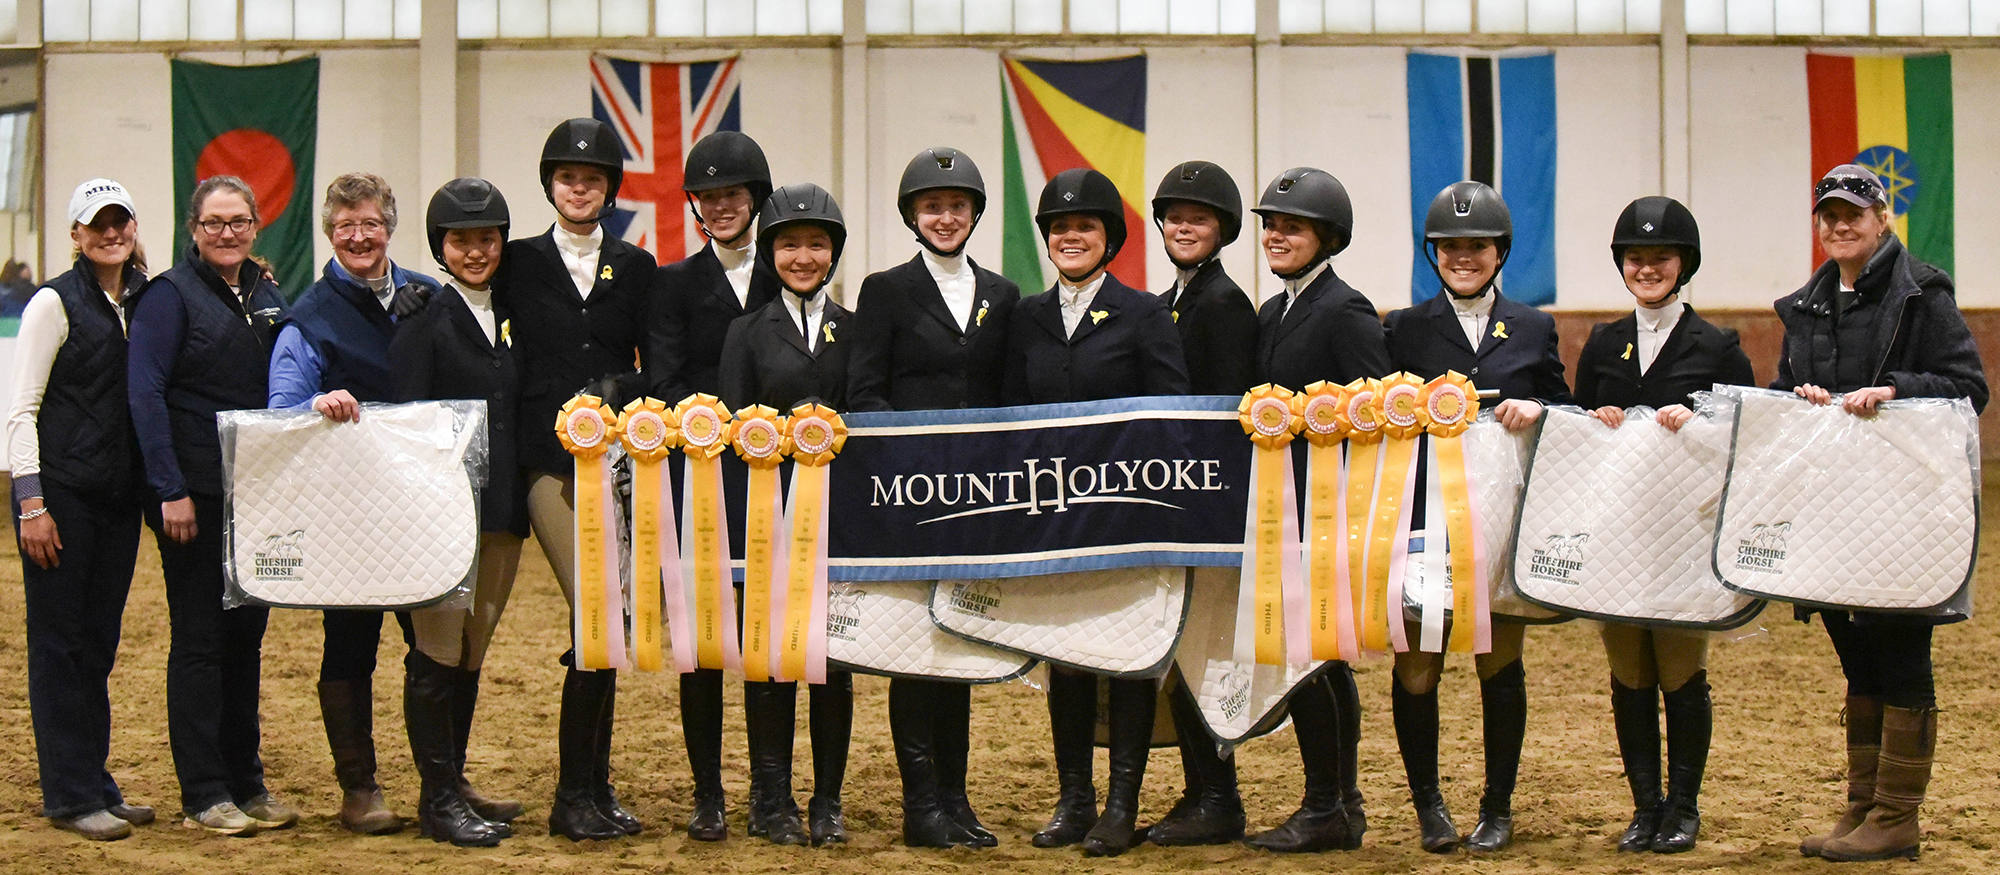 Group photo of the Lyons riding team following their third place finish at the 2019 Zone 1 Championships.